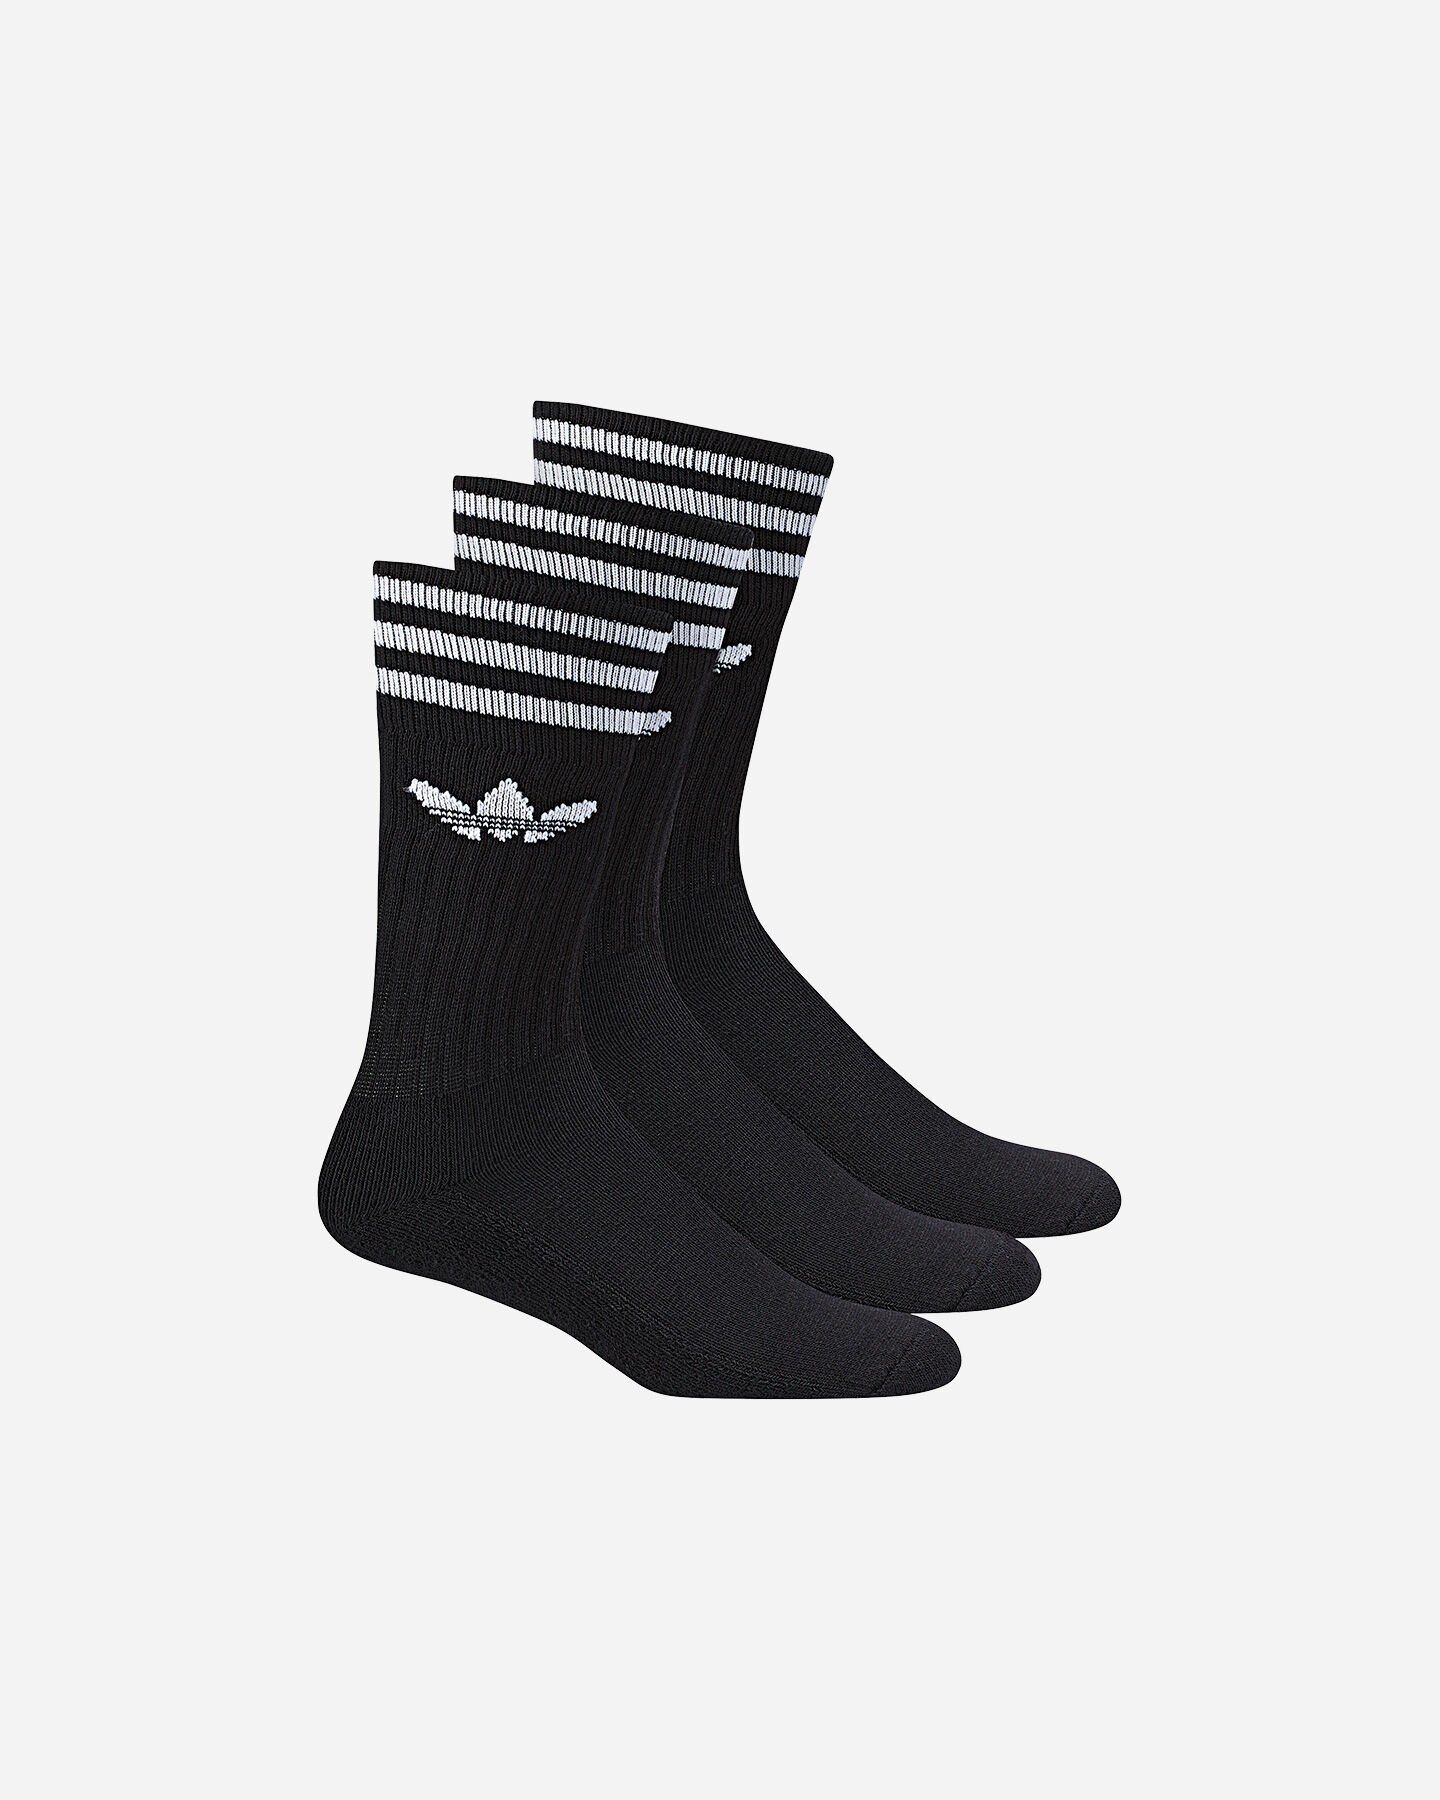  Calze ADIDAS SOLID CREW SOCK 3 PACK M S4008865|BLACK/WHIT|4346 scatto 0